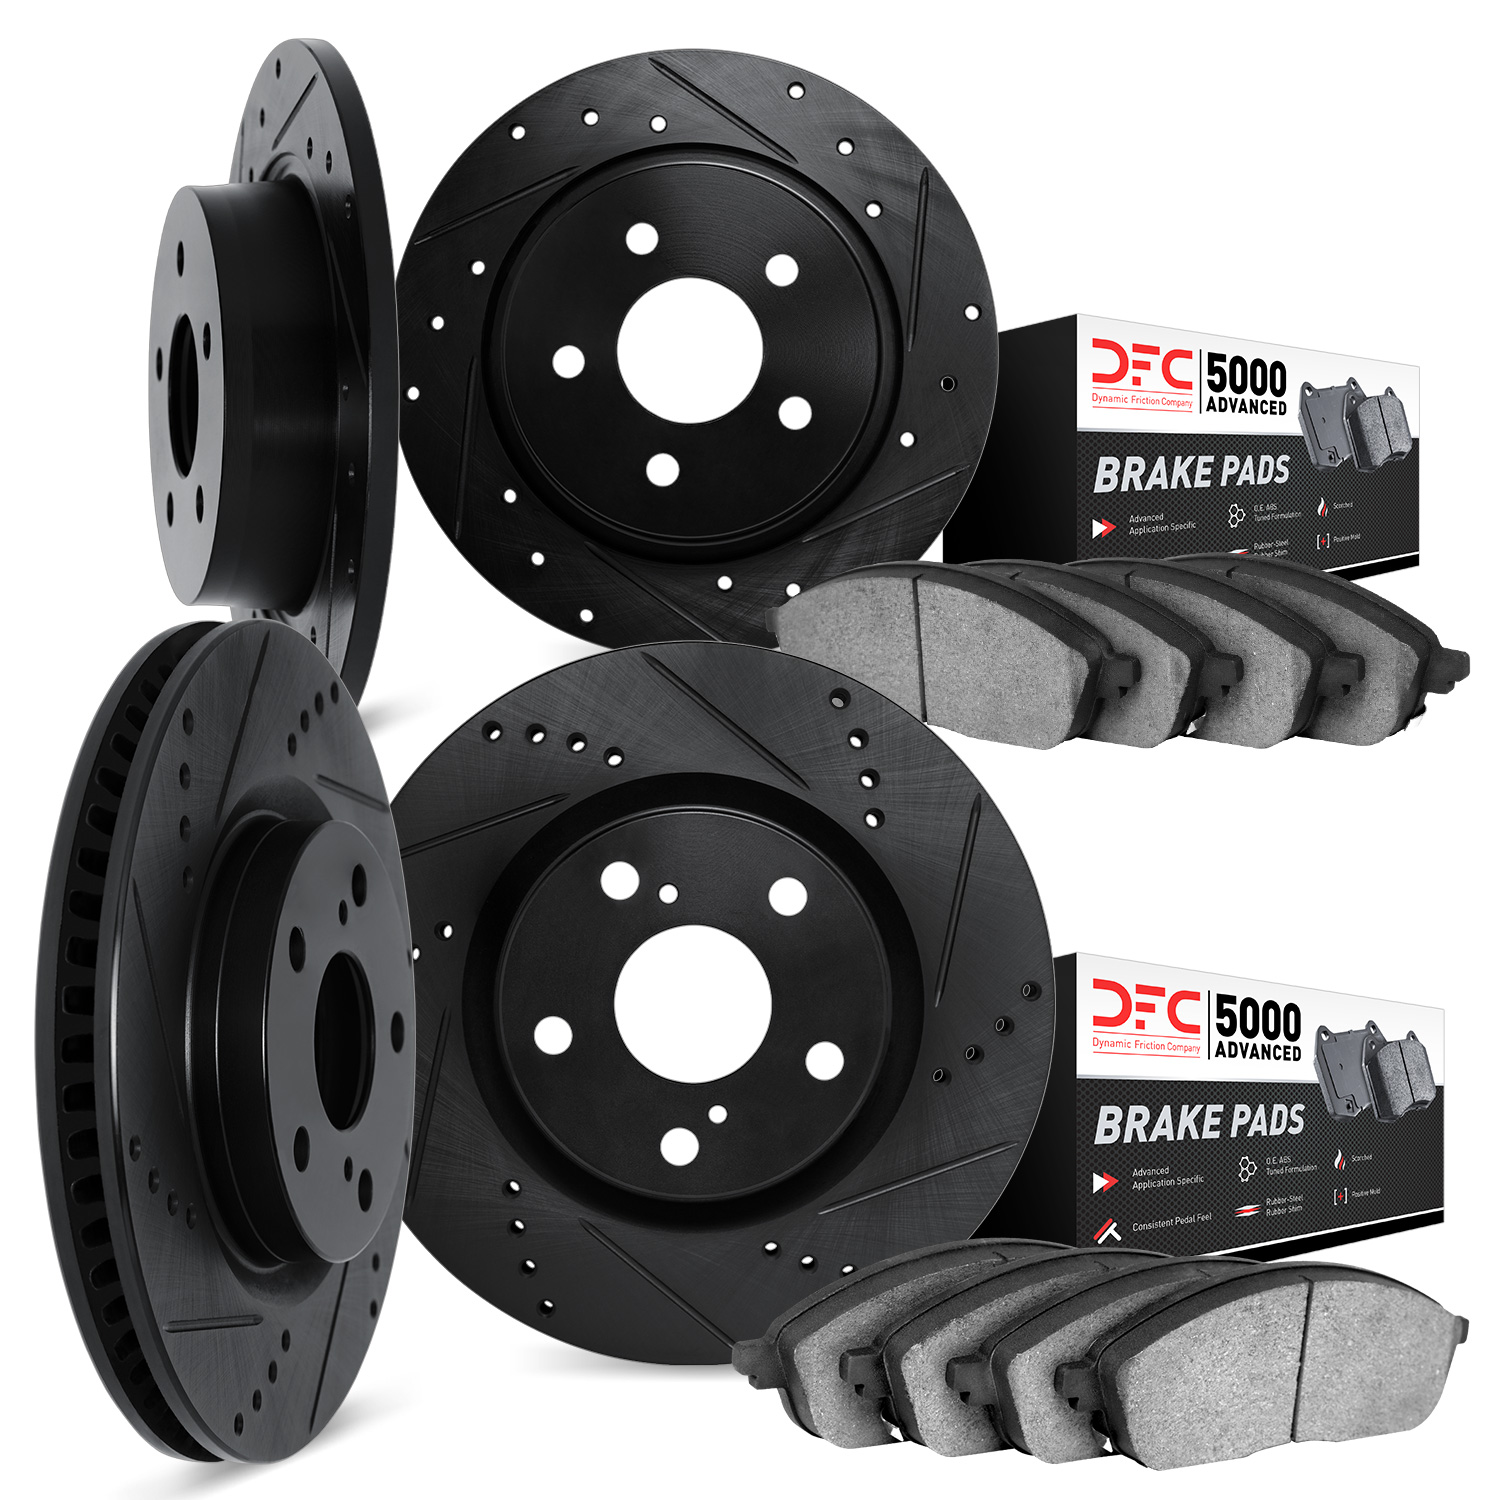 8504-76142 Drilled/Slotted Brake Rotors w/5000 Advanced Brake Pads Kit [Black], 2001-2003 Lexus/Toyota/Scion, Position: Front an